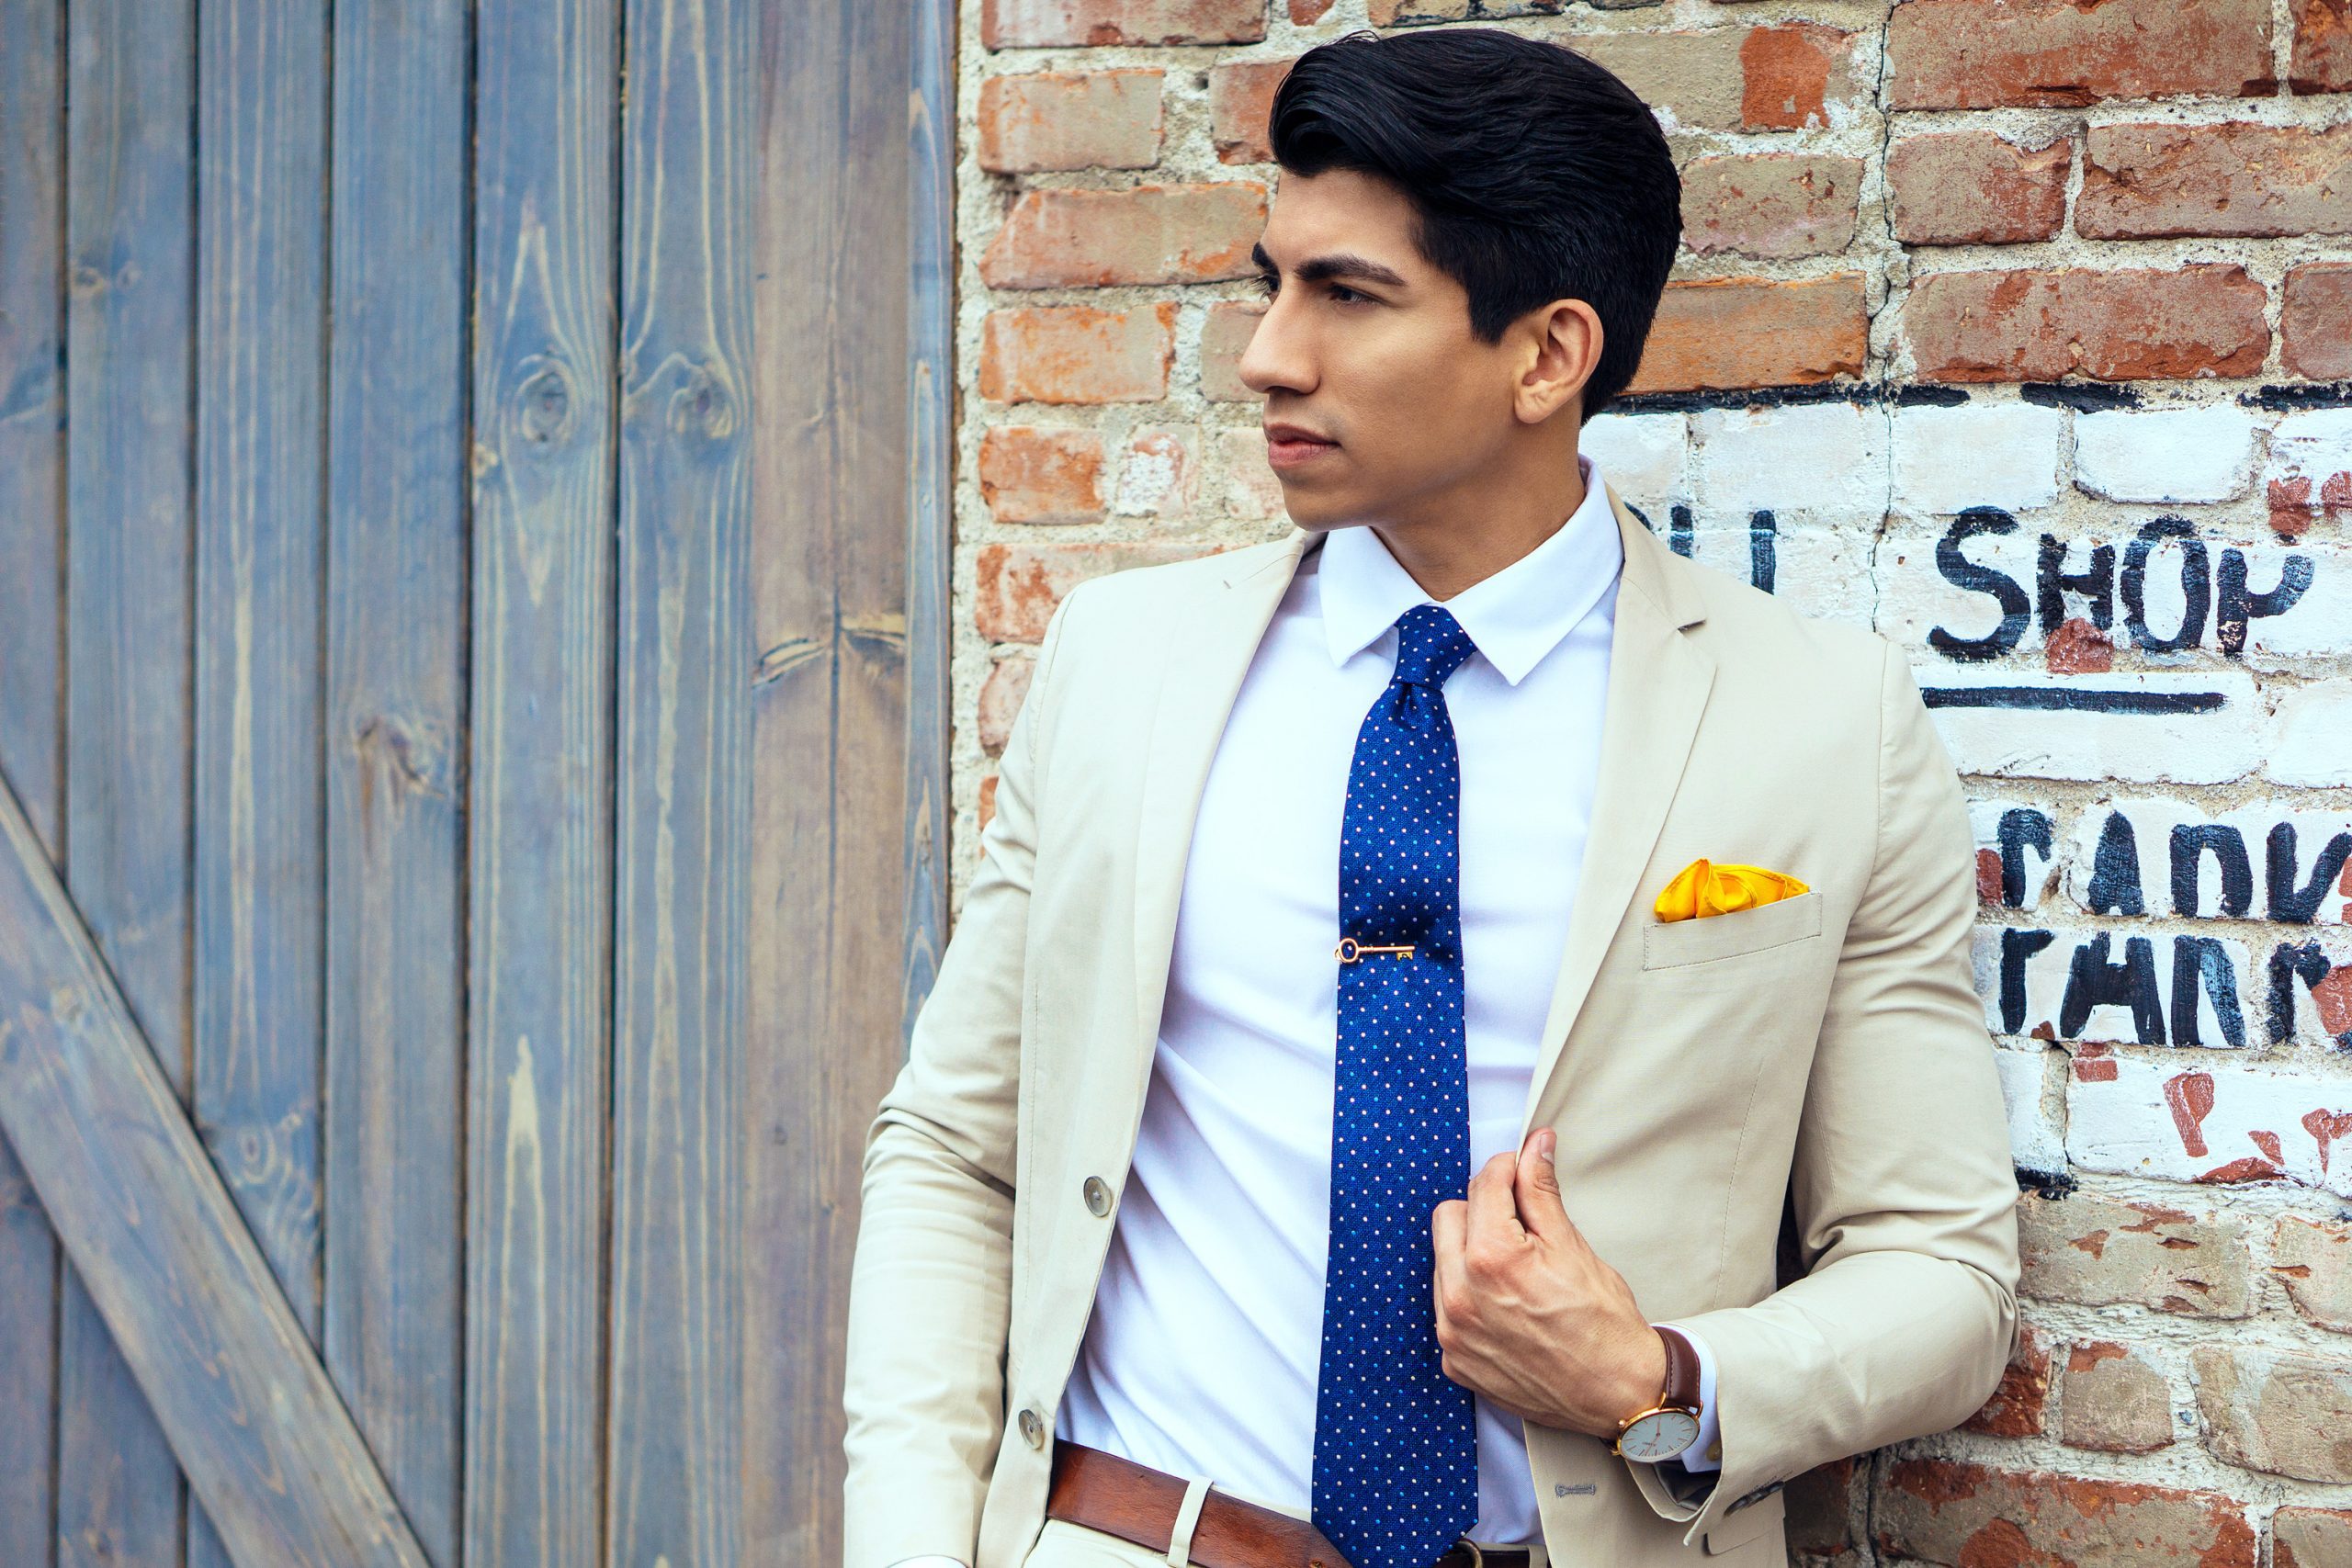 HOW TO WEAR A TIE BAR - Dandy In The Bronx